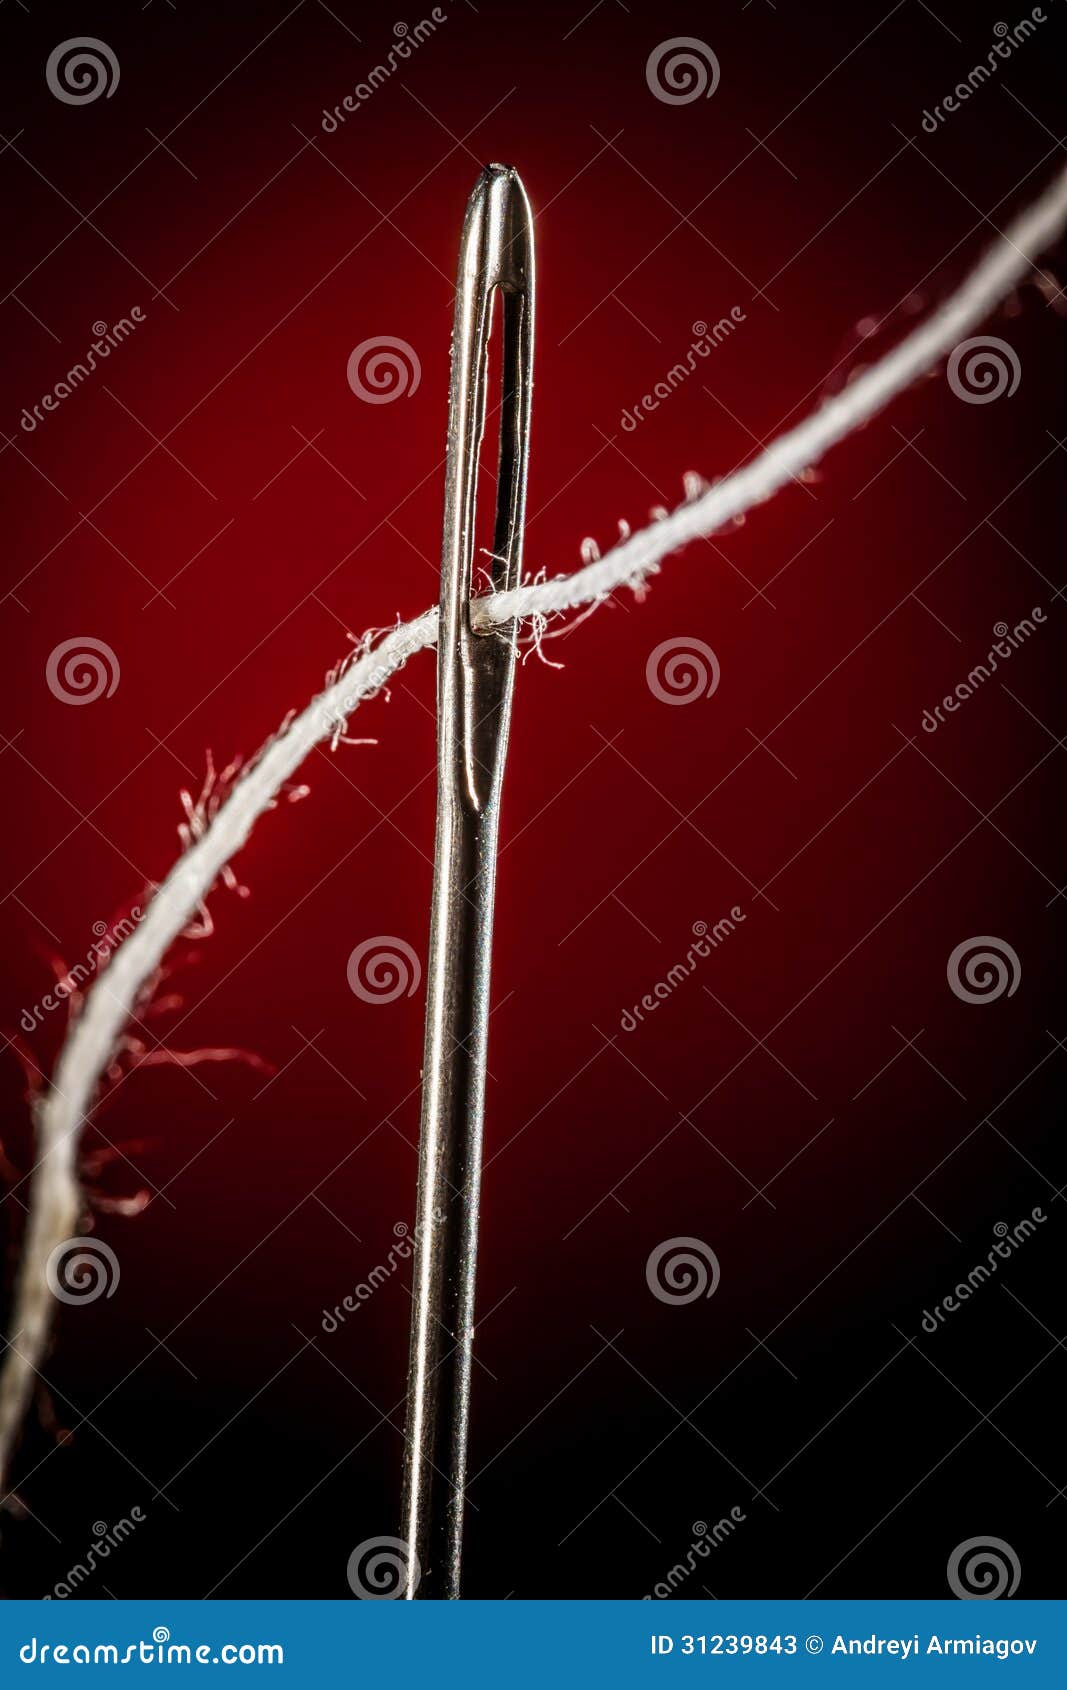 Needle with thread stock image. Image of tool, sharp - 31239843